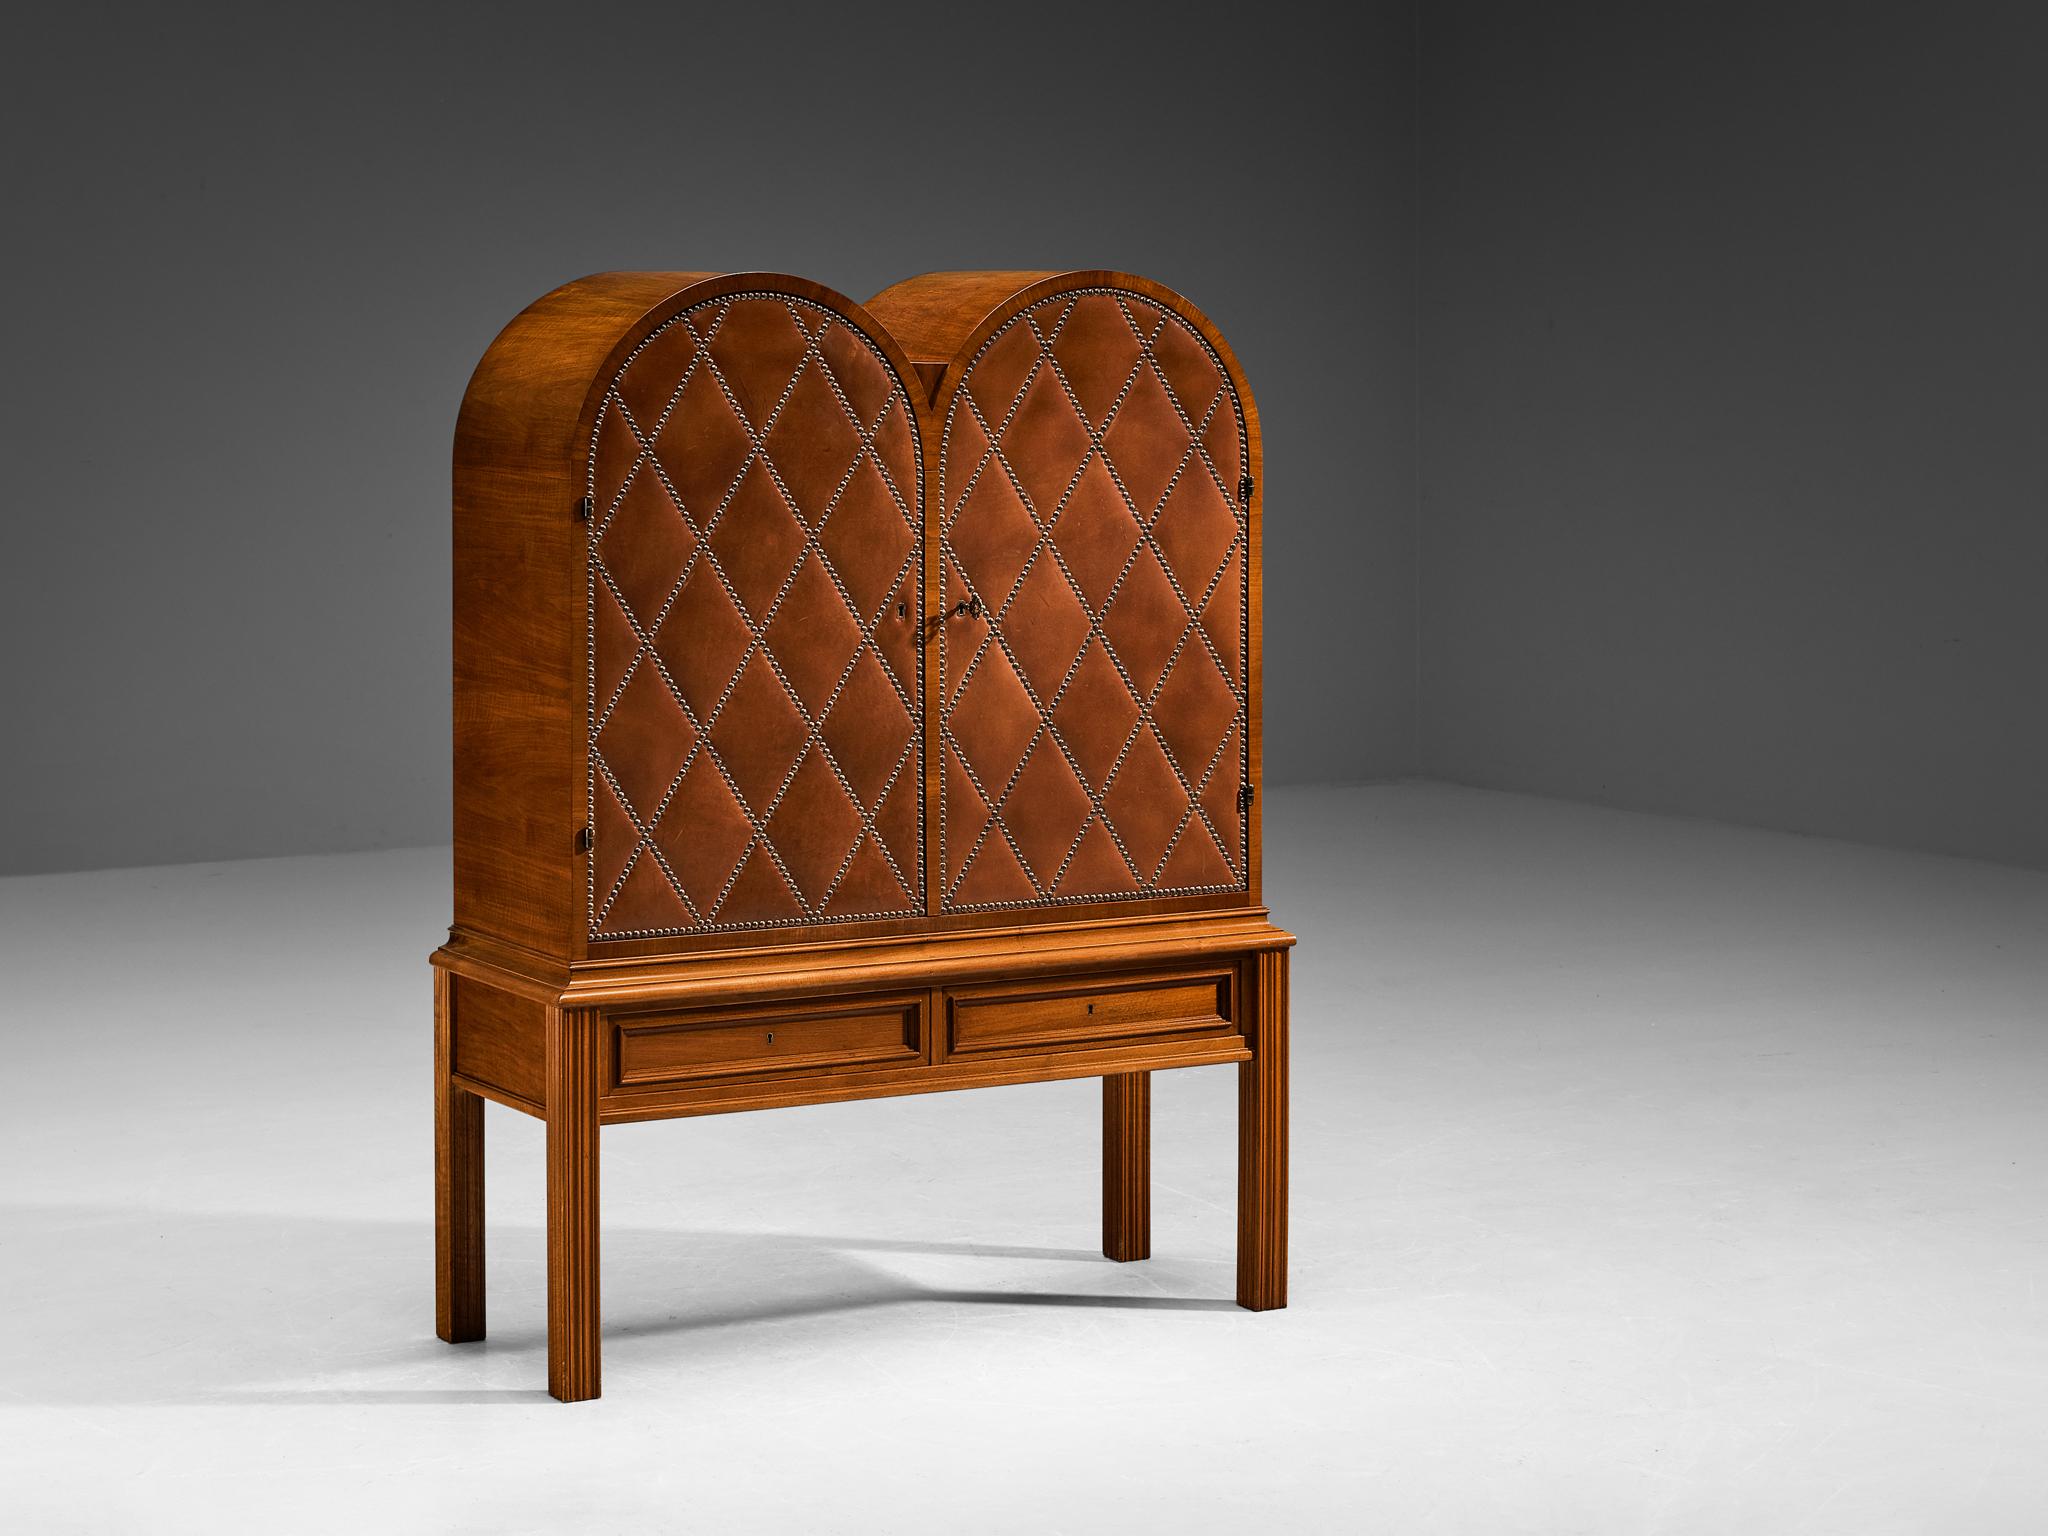 Otto Schulz, bar cabinet, walnut veneer, leather, brass, glass, Sweden, circa 1940.

This beautifully decorated bar piece was designed by Otto Schulz. It shows well-chosen proportions, with an open base and a well-sized bar unit placed on top. This